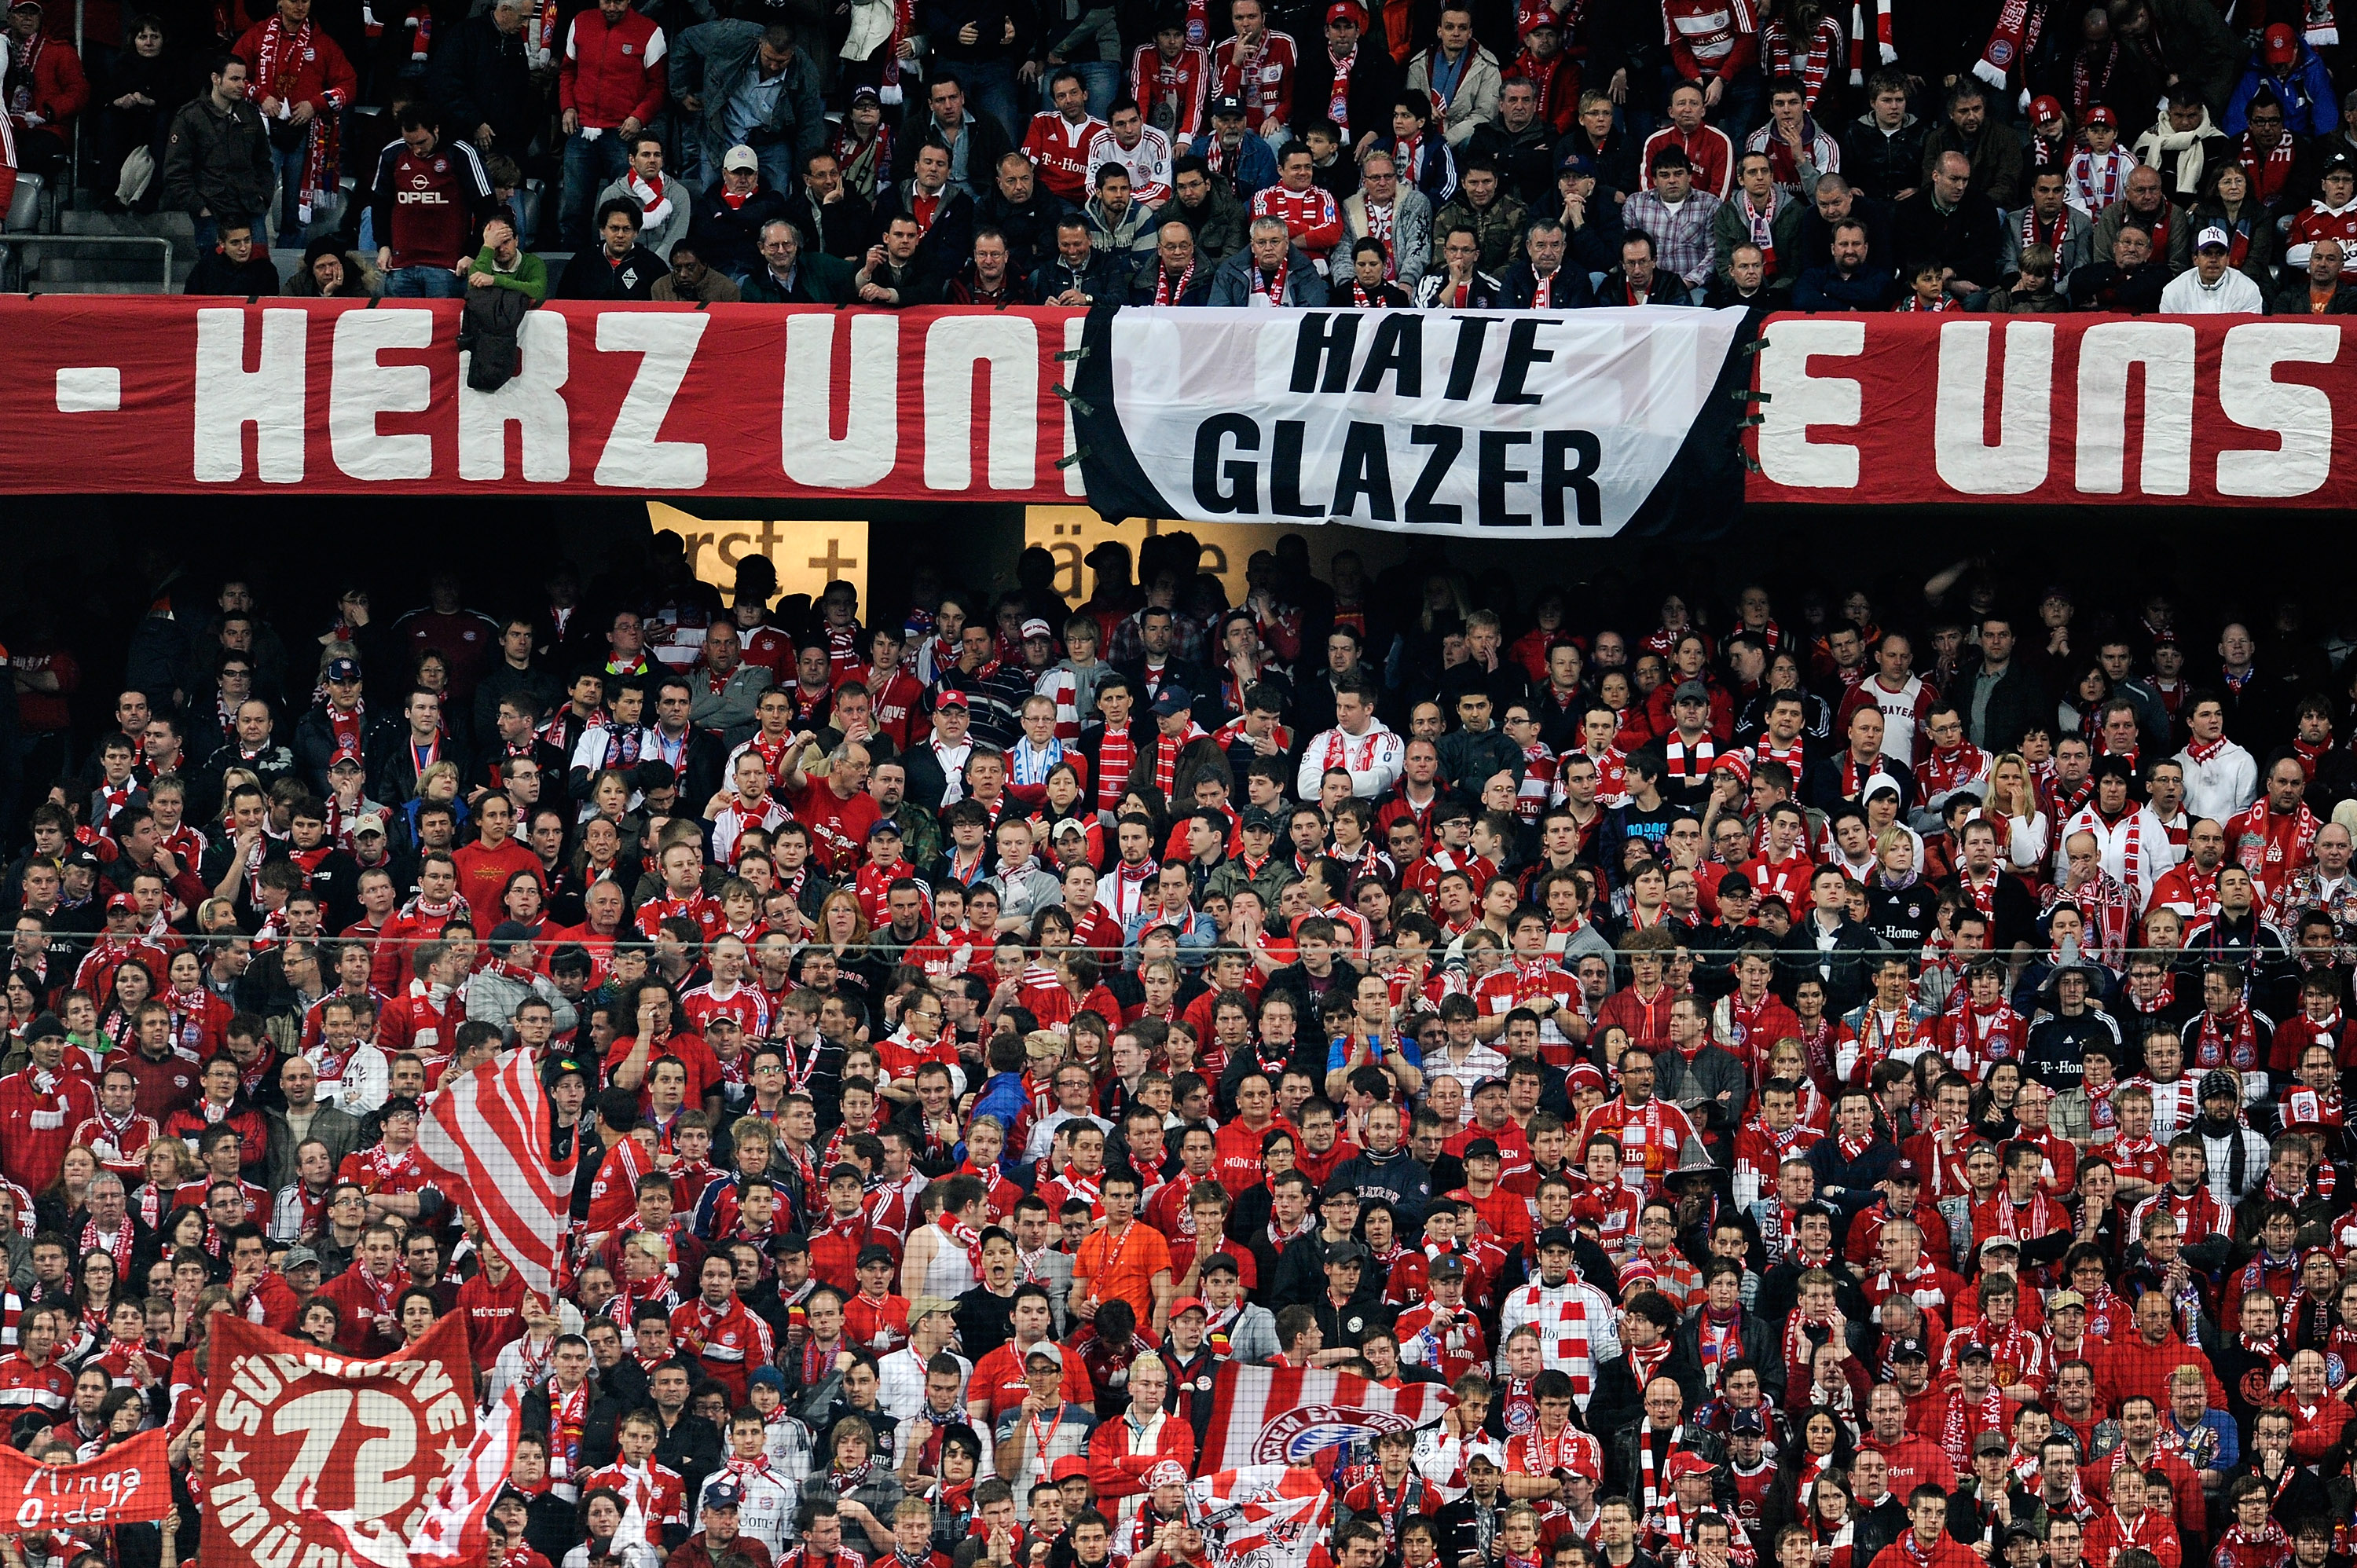 MUNICH, GERMANY - MARCH 30:  A sign displaying 'Hate Glazer' in among the Bayern fans during the UEFA Champions League quarter final first leg match between Bayern Muenchen and Manchester United at the Allianz Arena on March 30, 2010 in Munich, Germany.